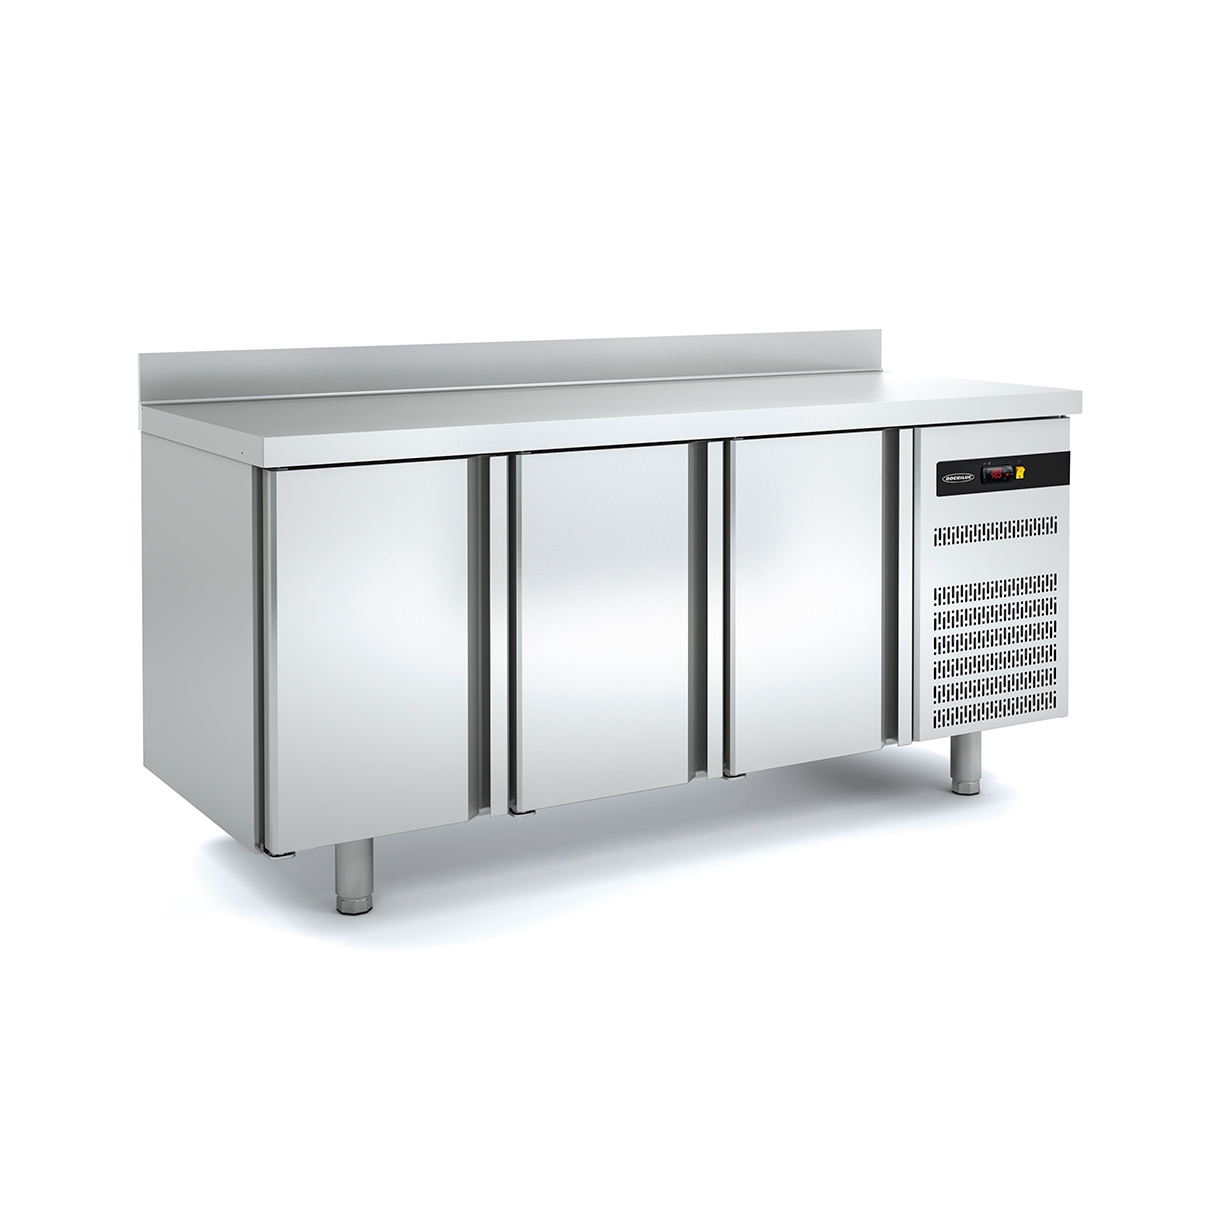 GN 1/1 Refrigerated Table MGD